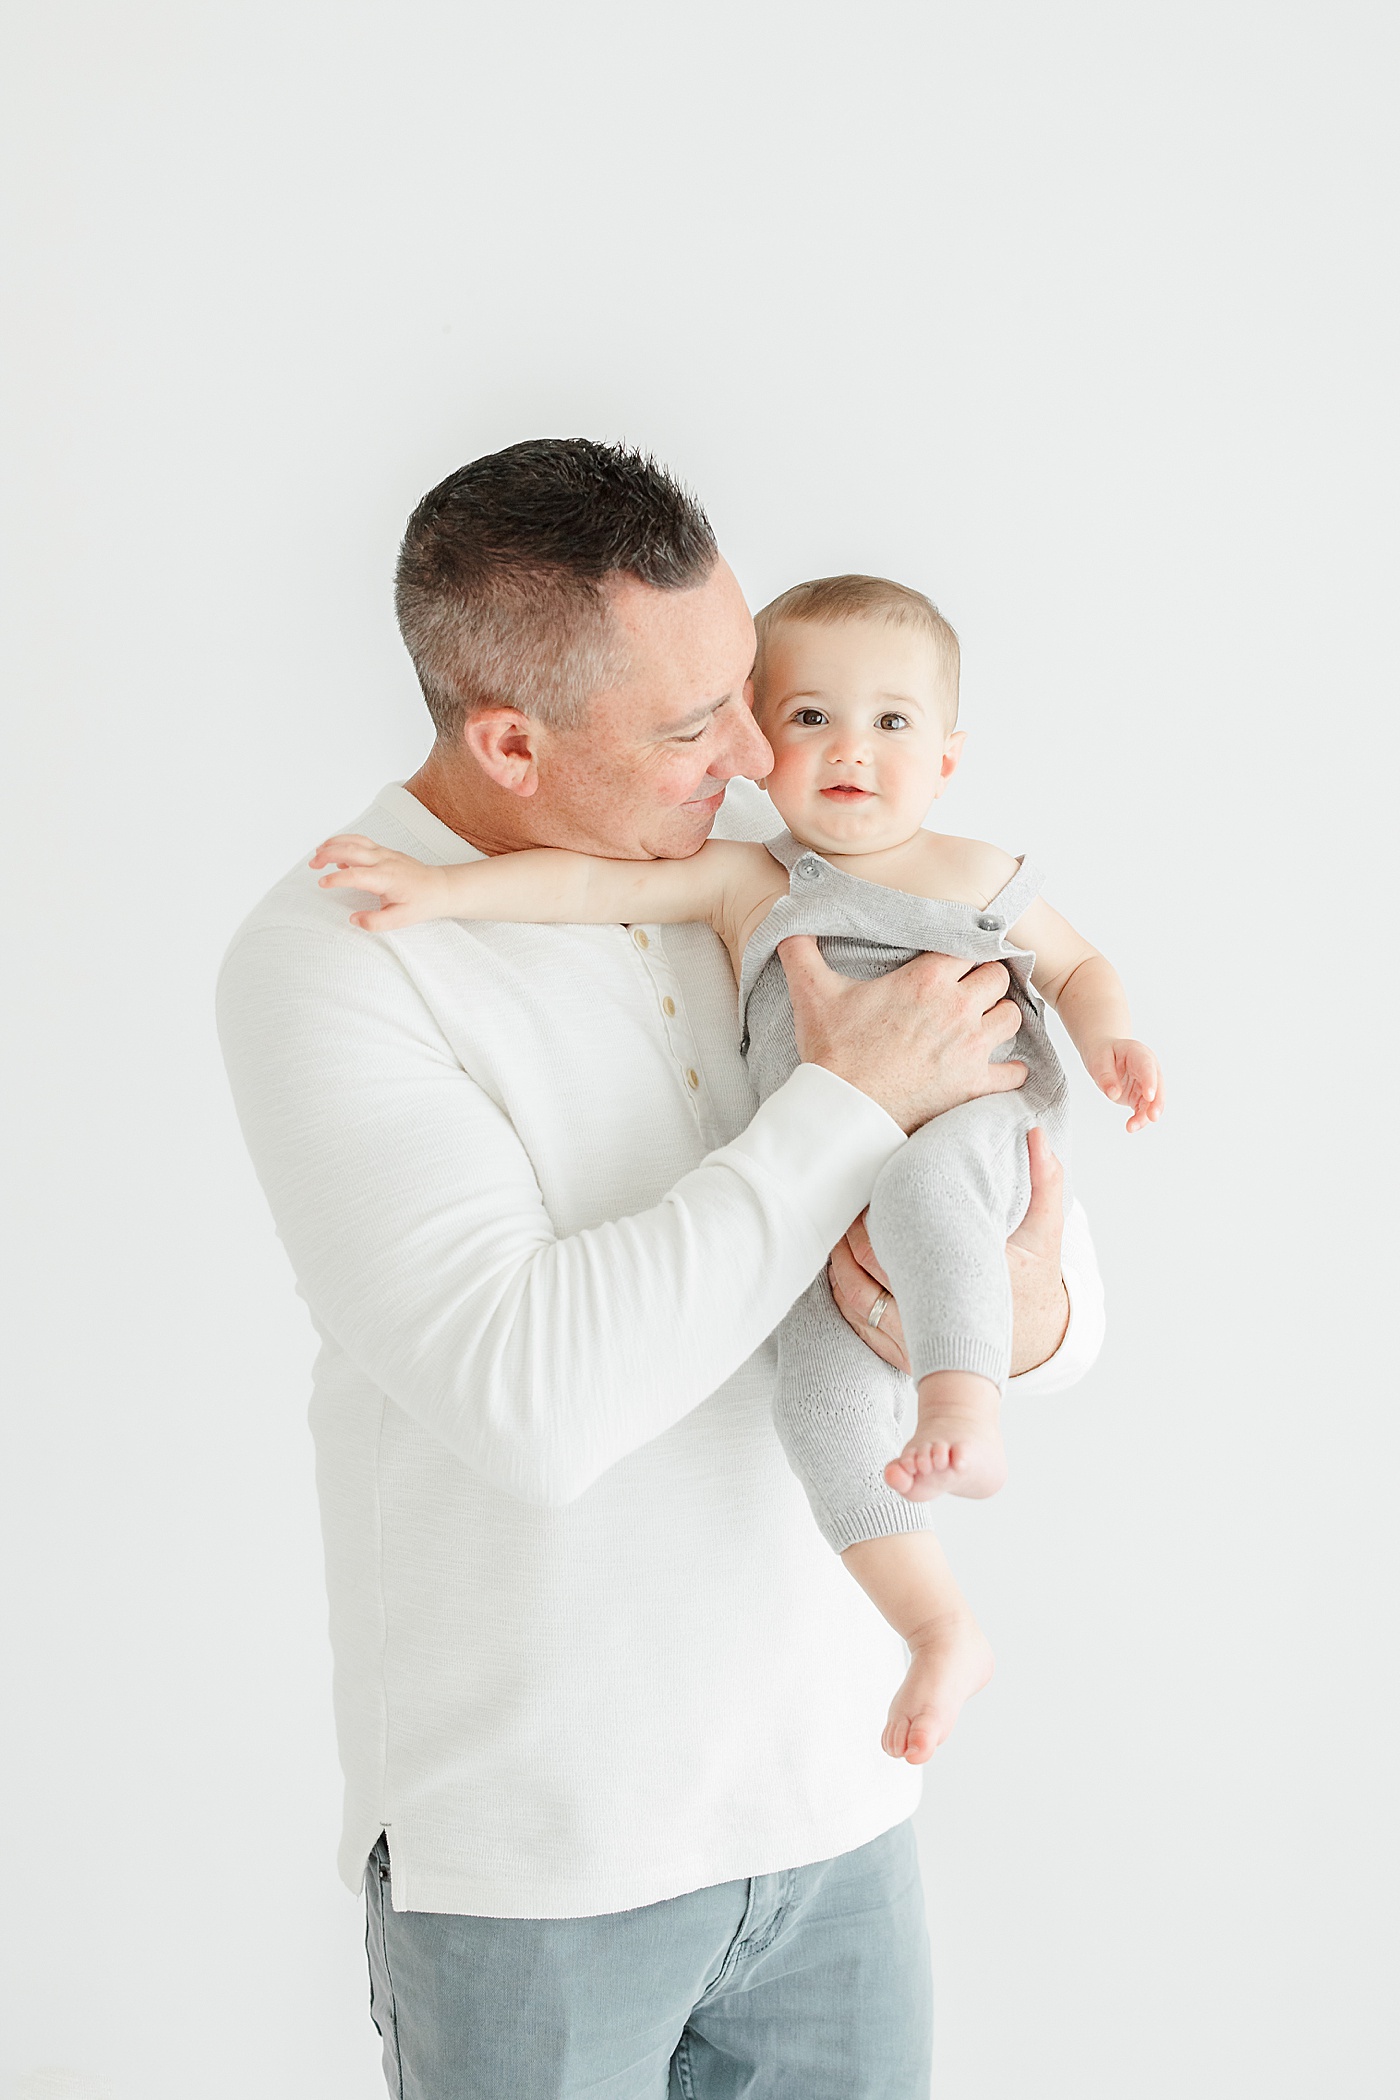 Father-son photos during first birthday photoshoot in studio with Kristin Wood Photography.